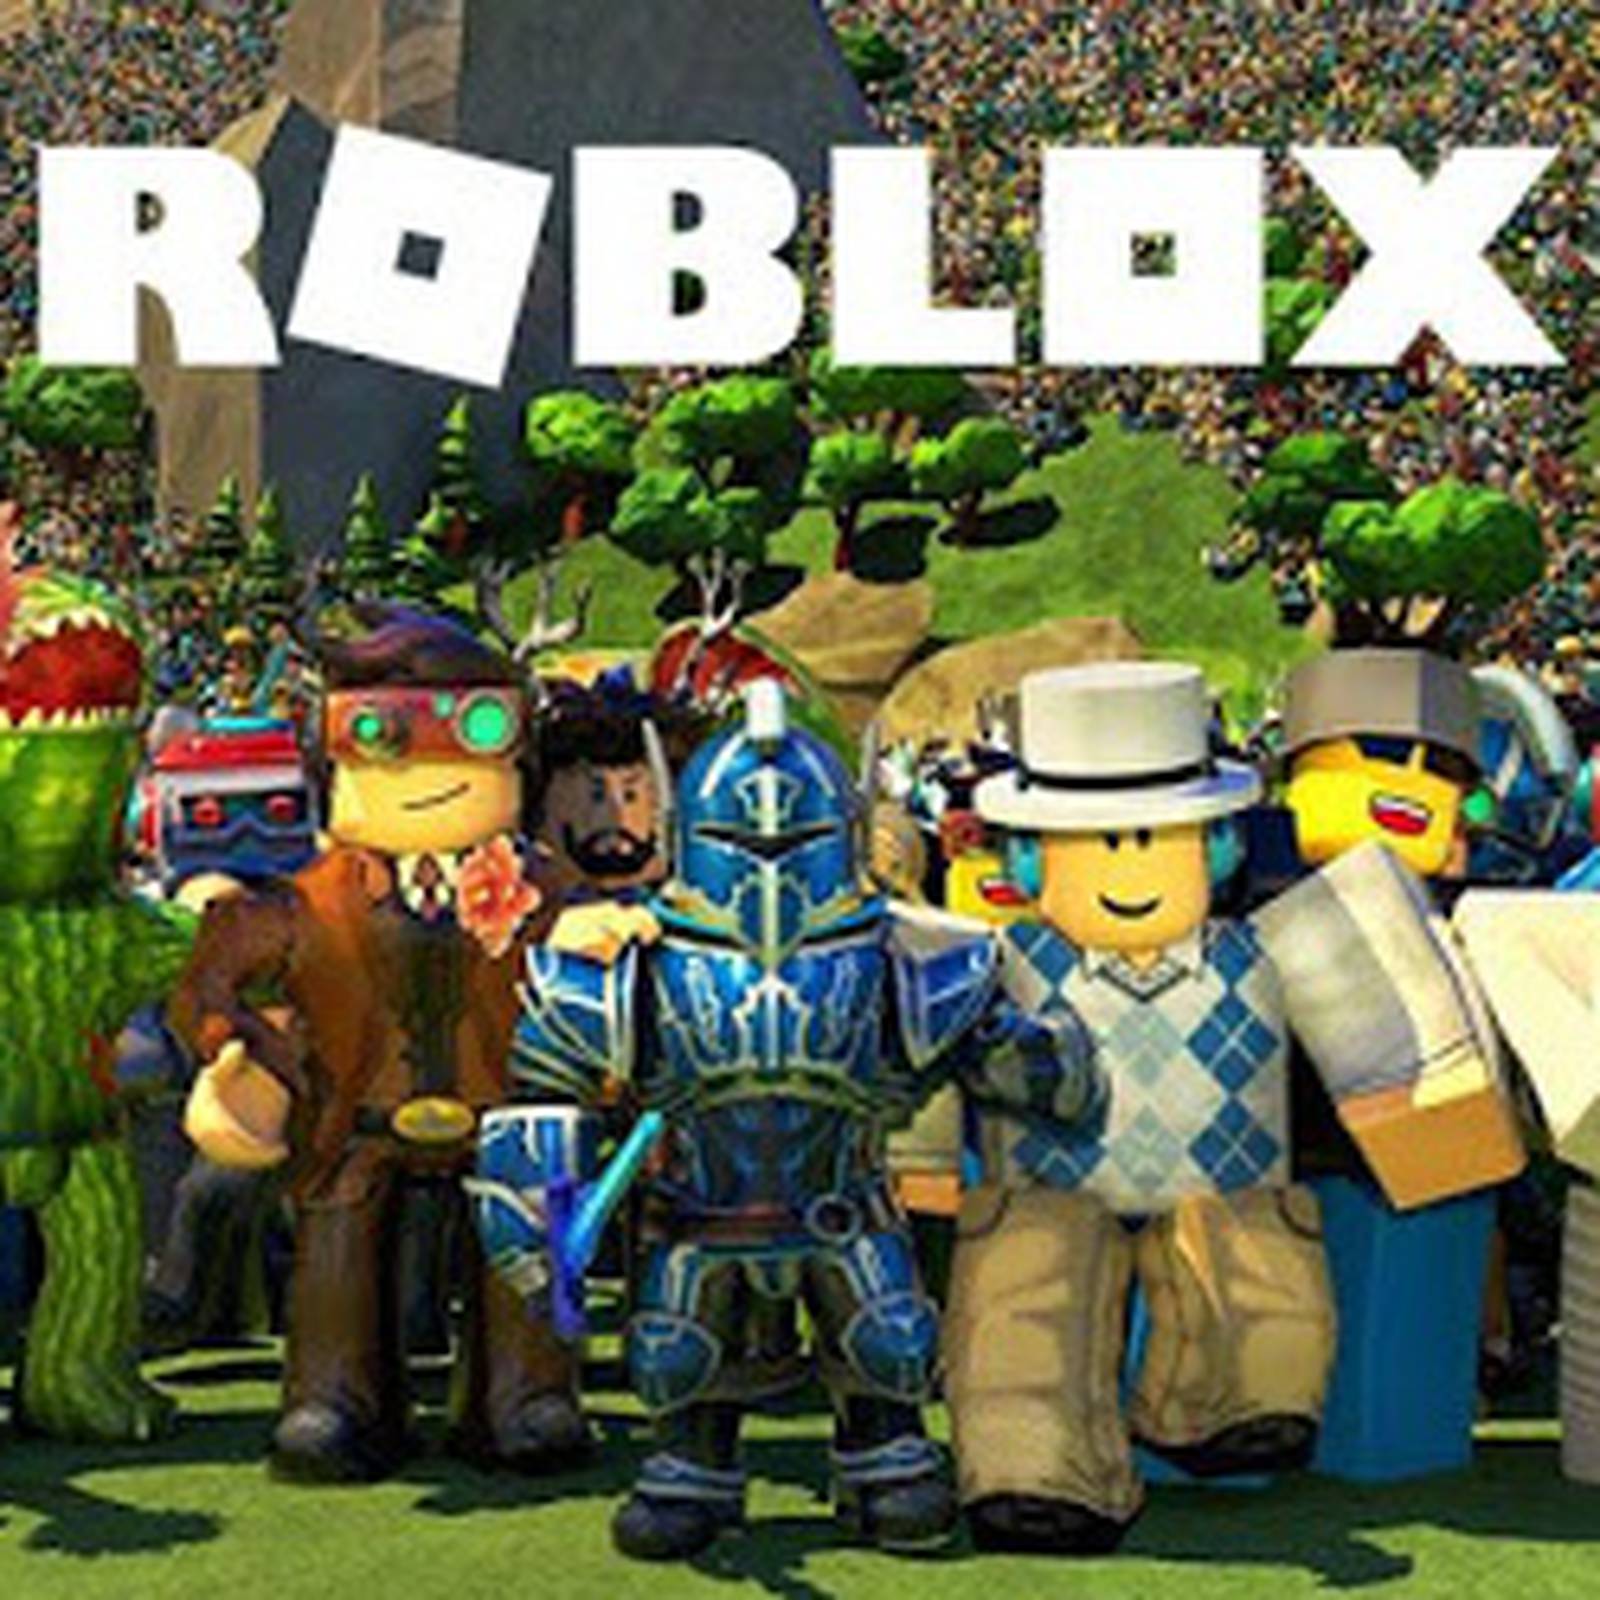 Roblox: The booming video game that's now bigger than Minecraft